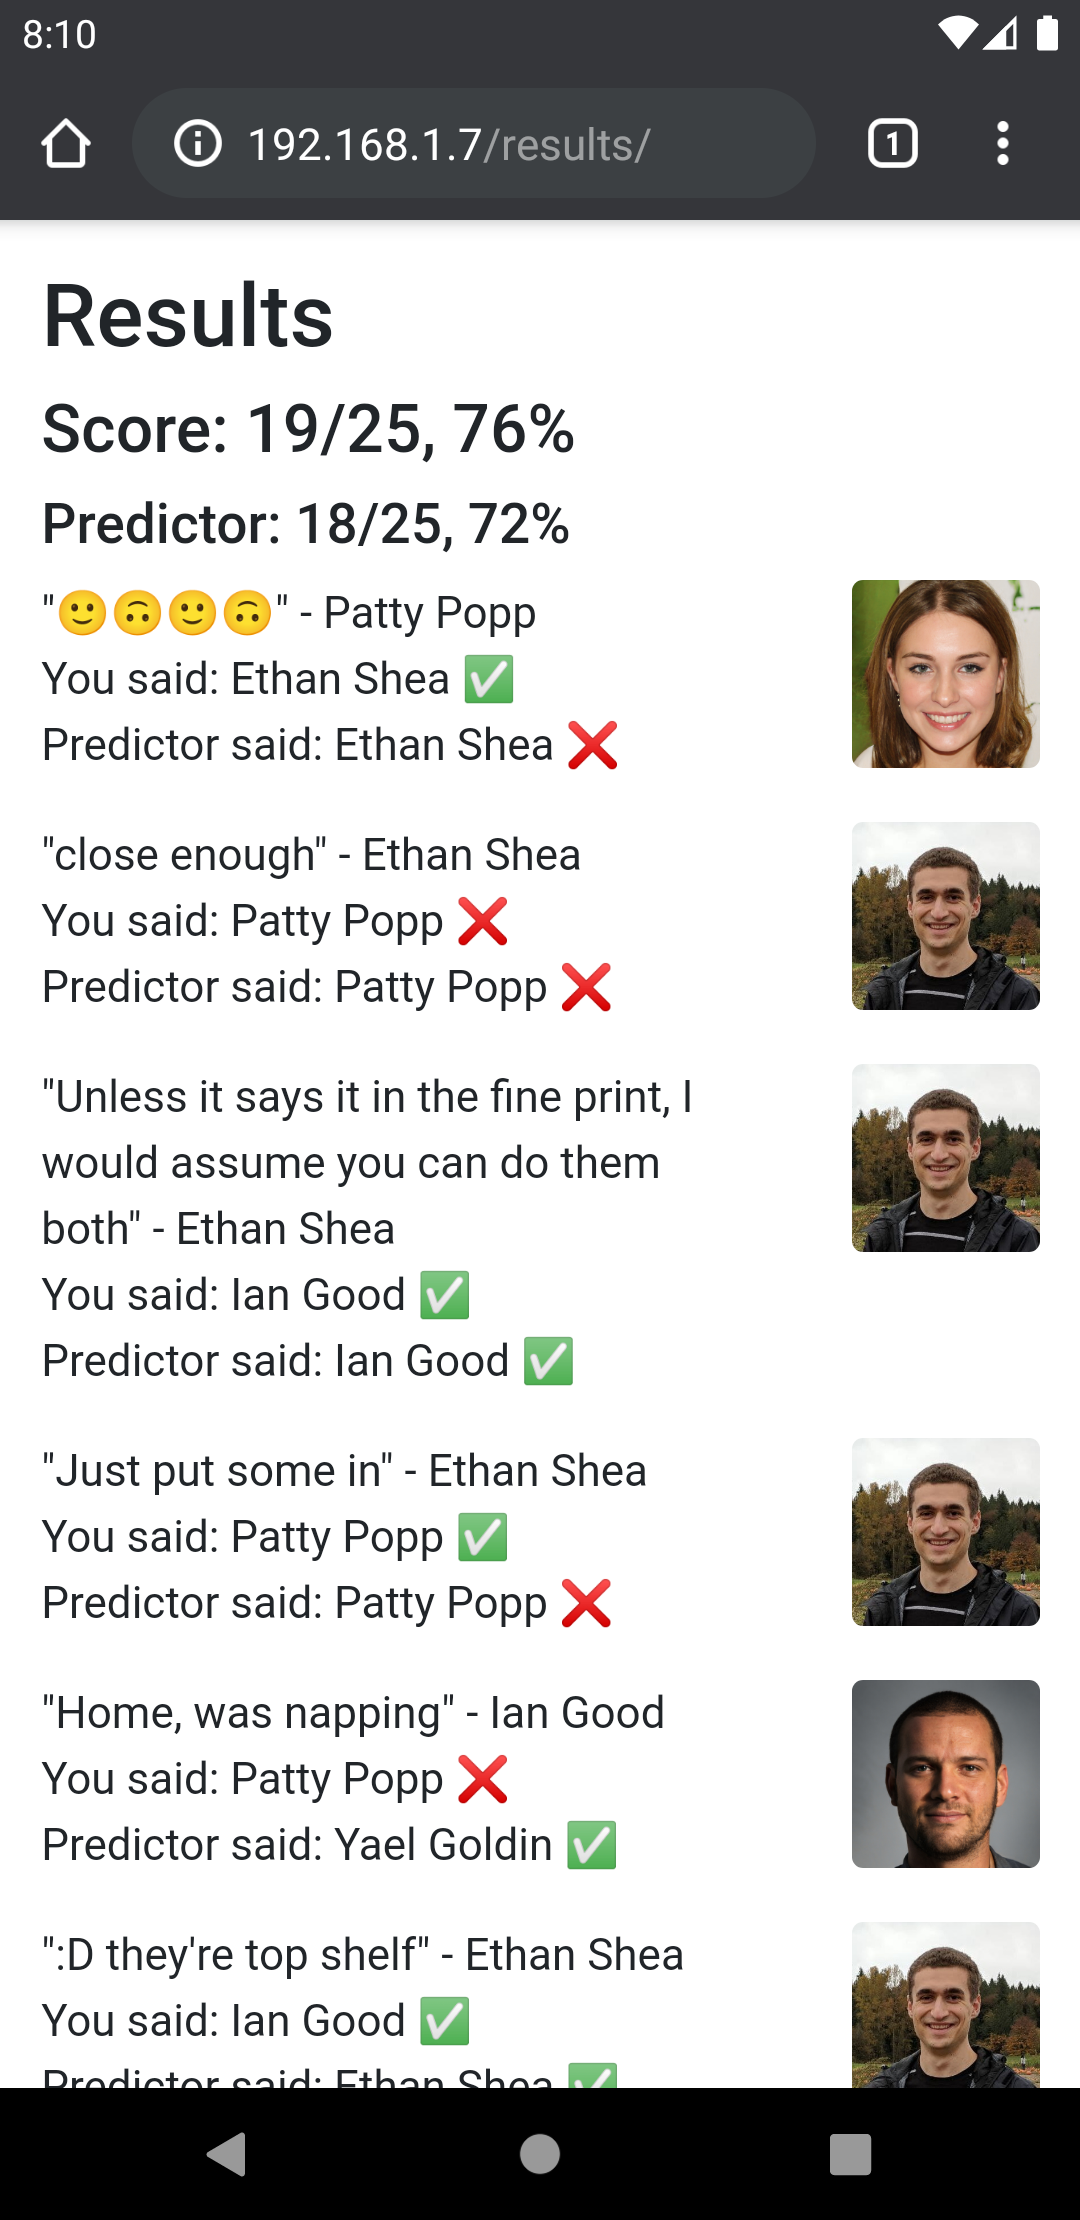 The user sees how well they were able to predict the phrases compared to the AI.